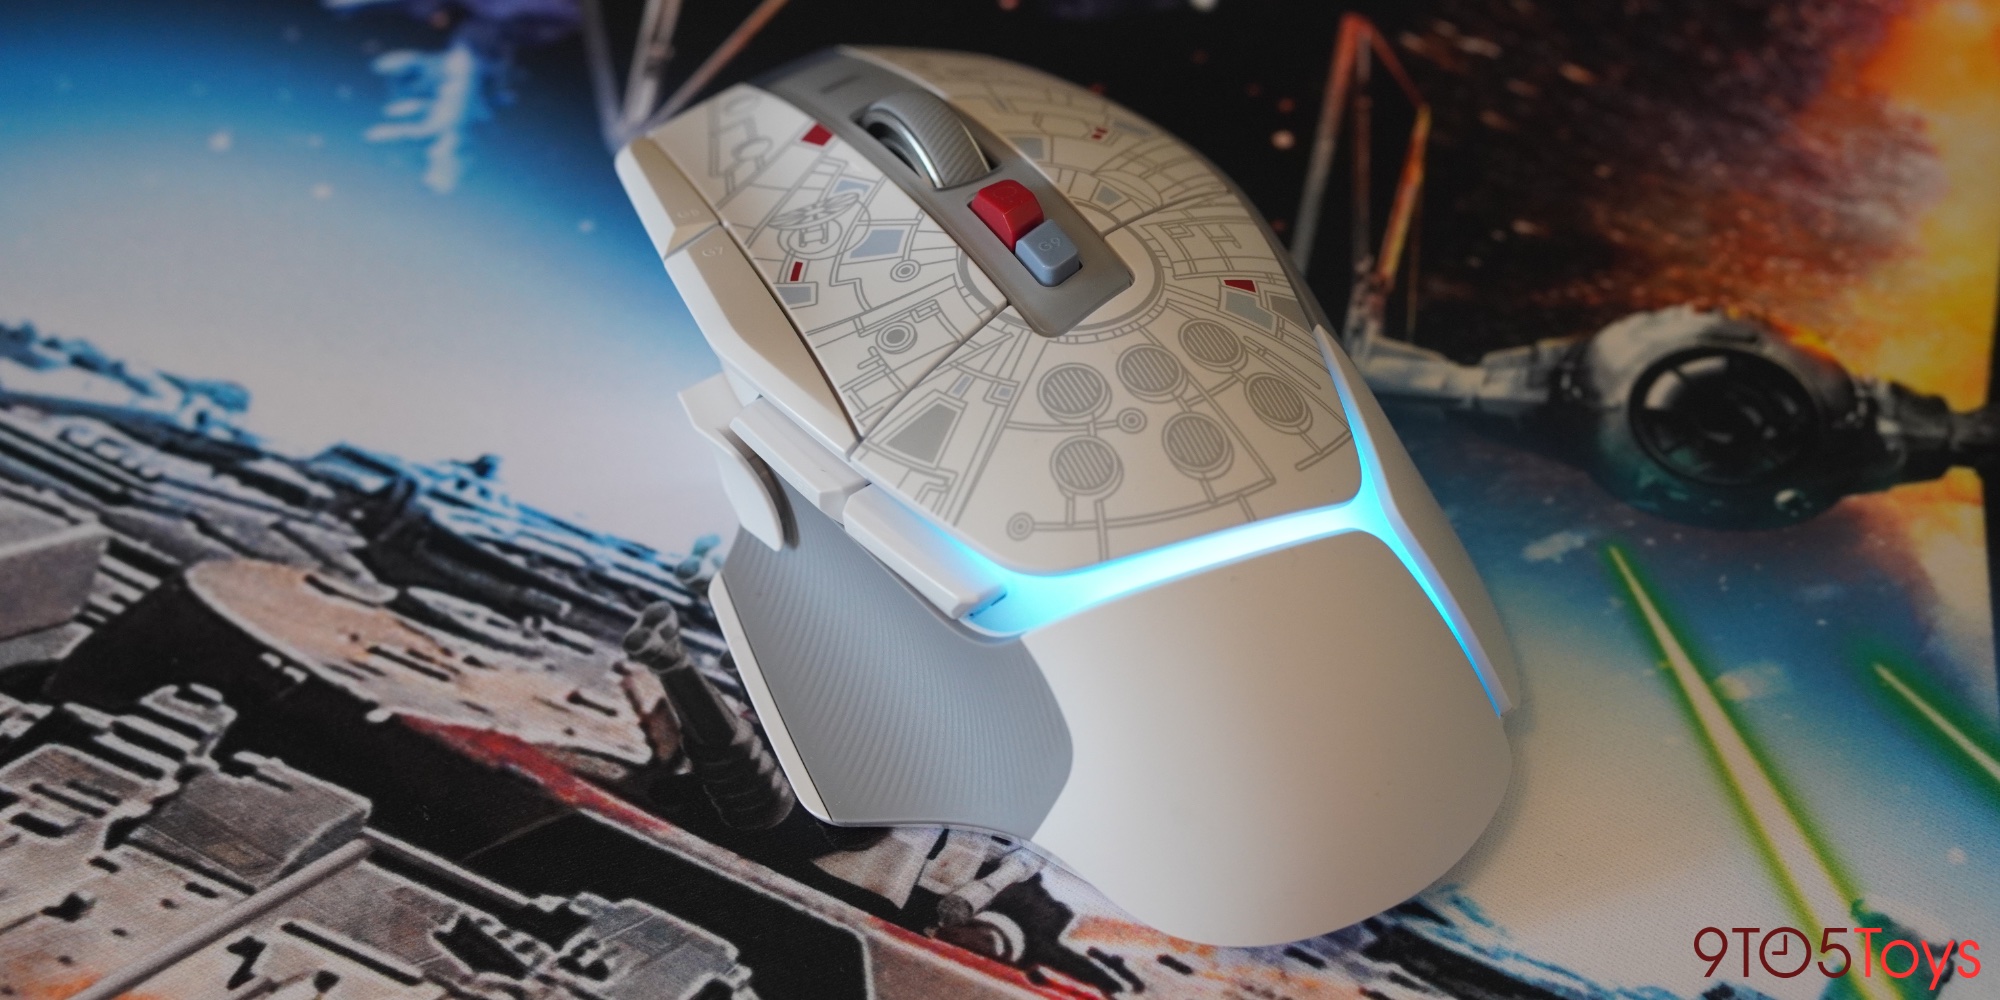 Logitech G502 X Plus Gaming Mouse Review